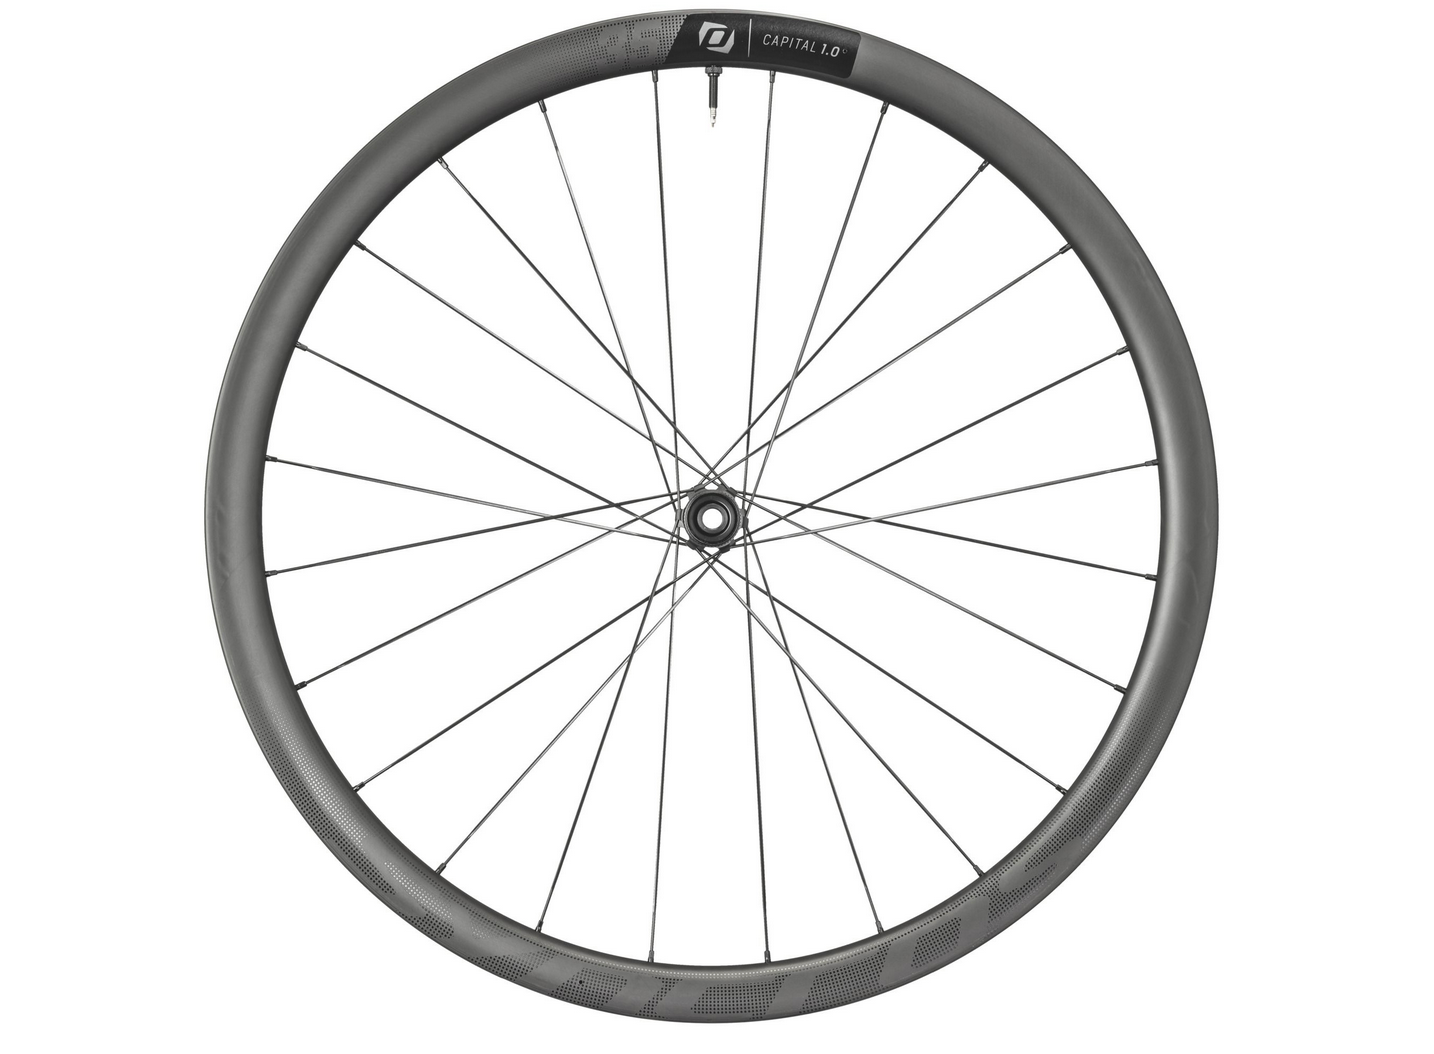 SYNCROS Capital 1.0 35mm - 700c - Carbon Disc Road Wheelset - Shimano 11 / 12s